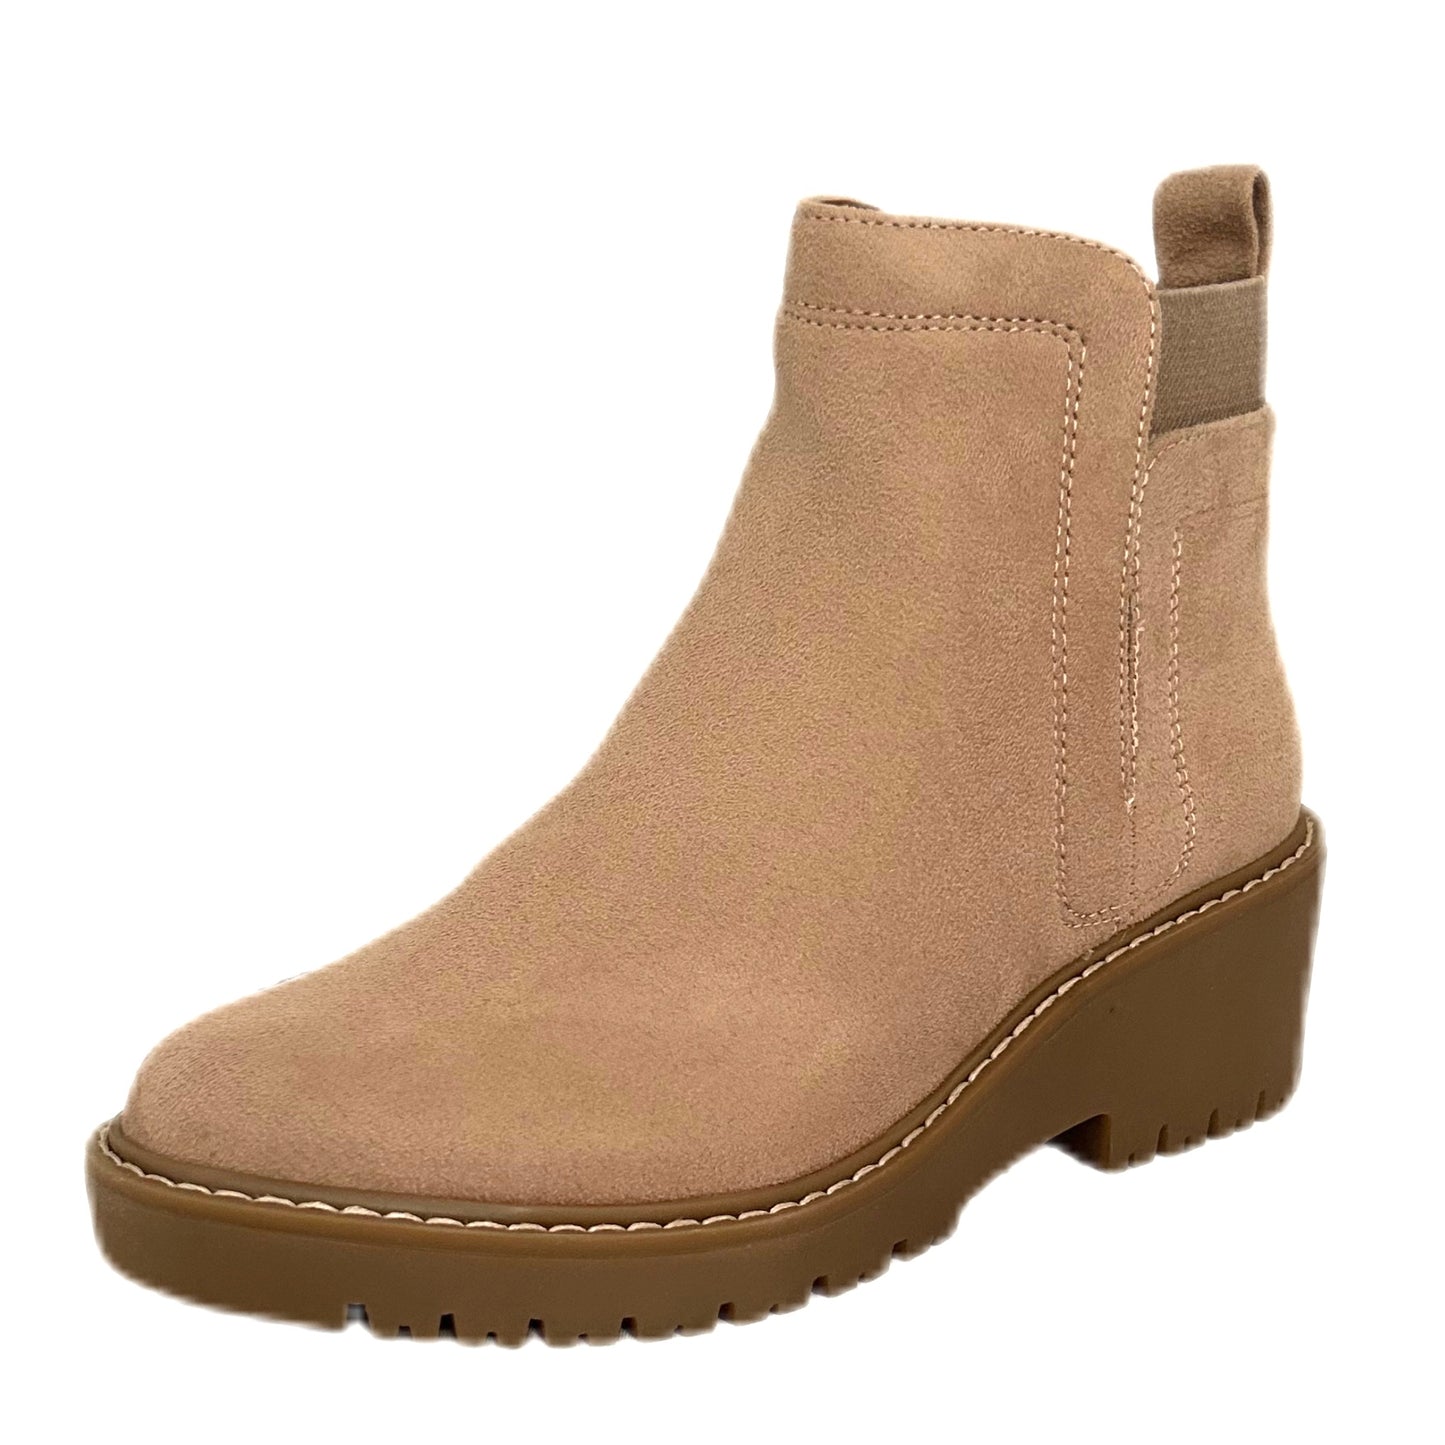 DEAR Booties Classic Chelsea Boots Women's Shoes